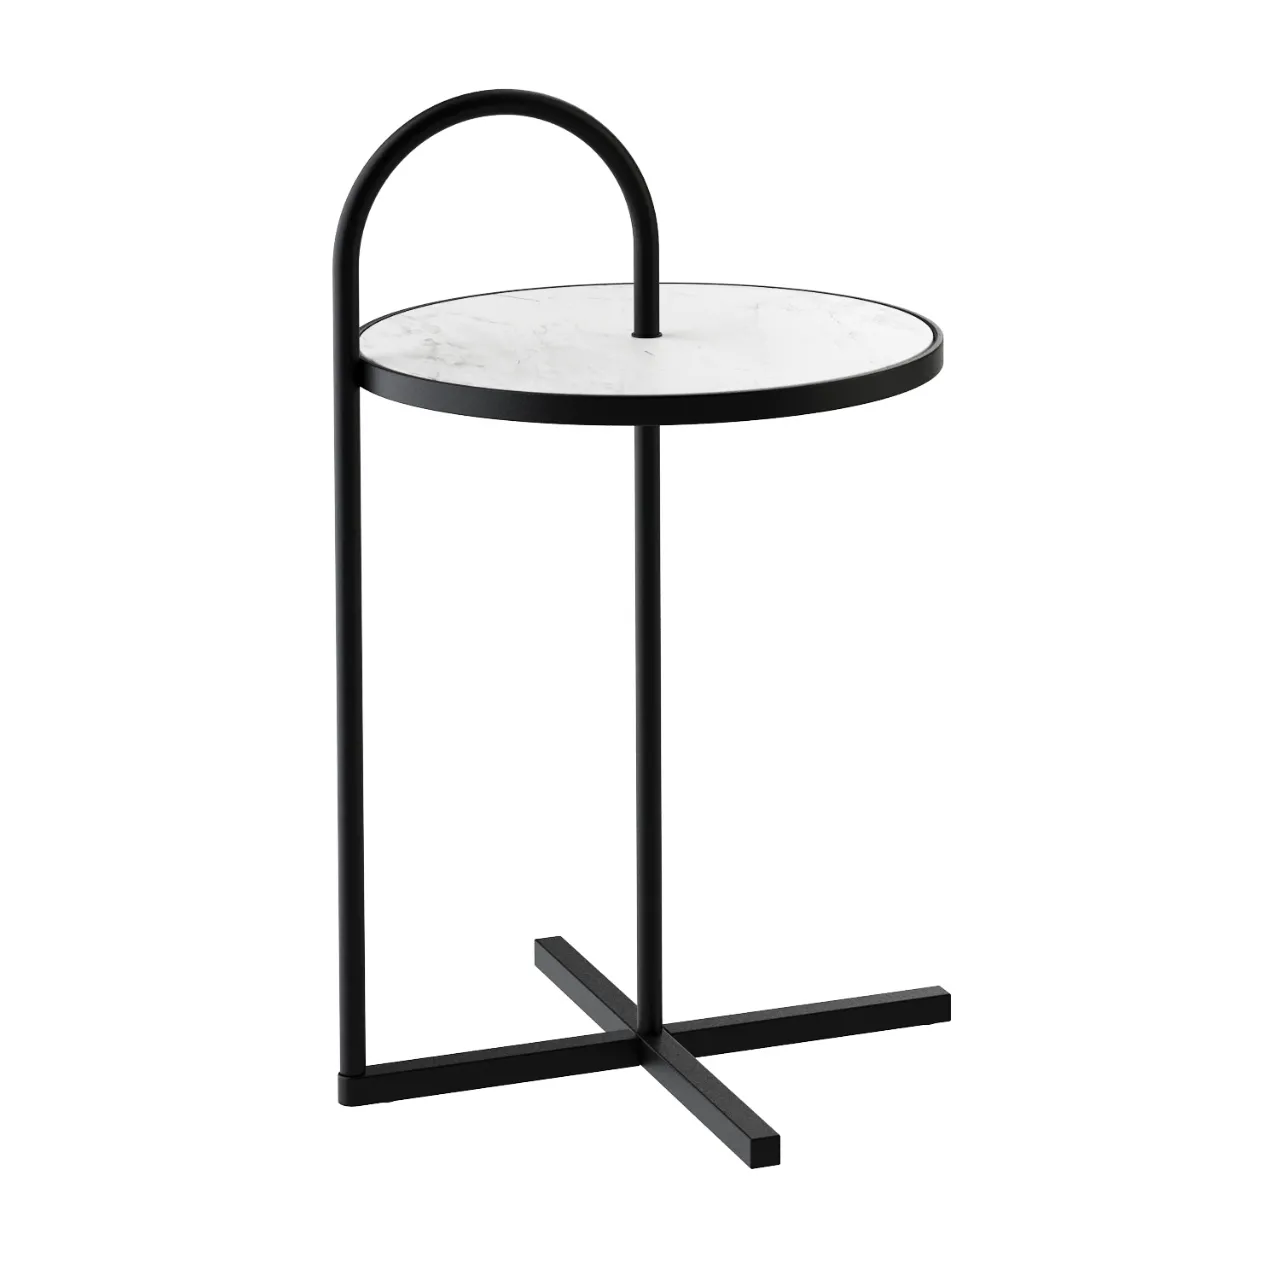 Furniture – 902-side-table-by-rolf-benz